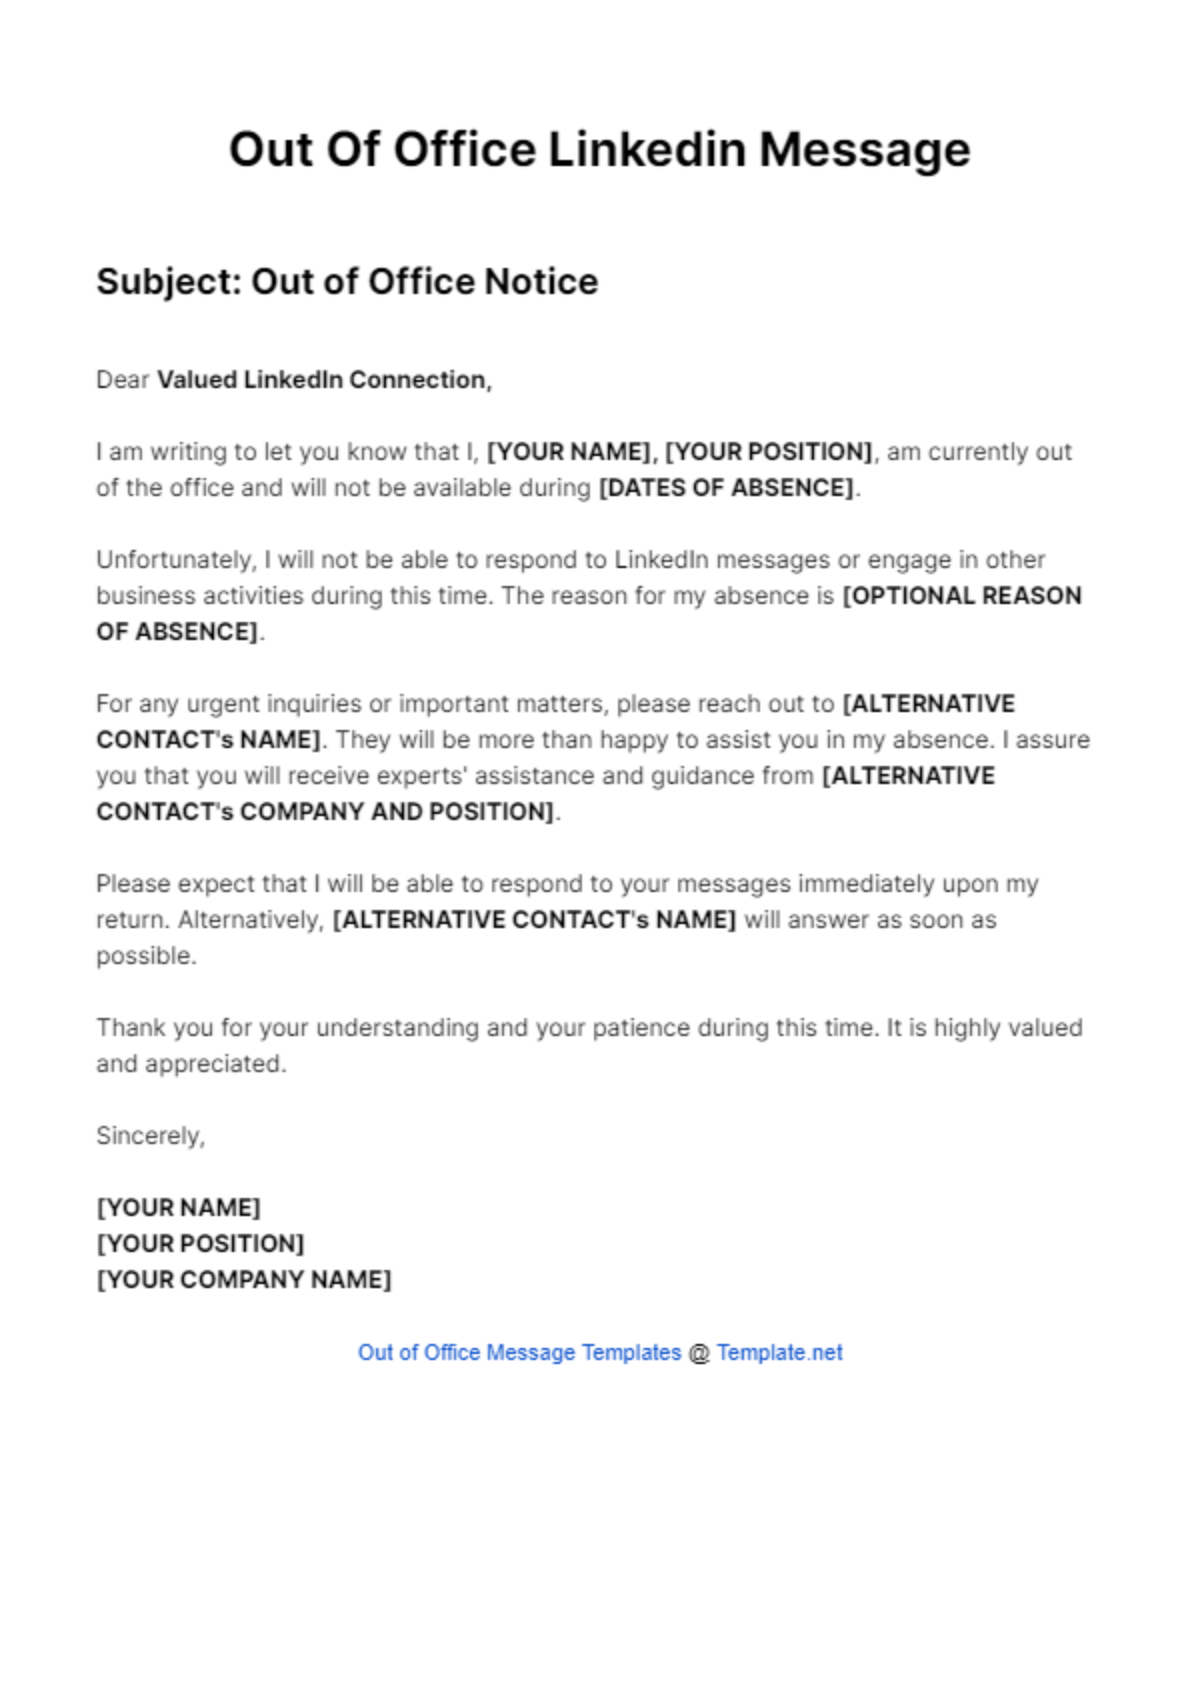 Out Of Office Linkedin Message Template